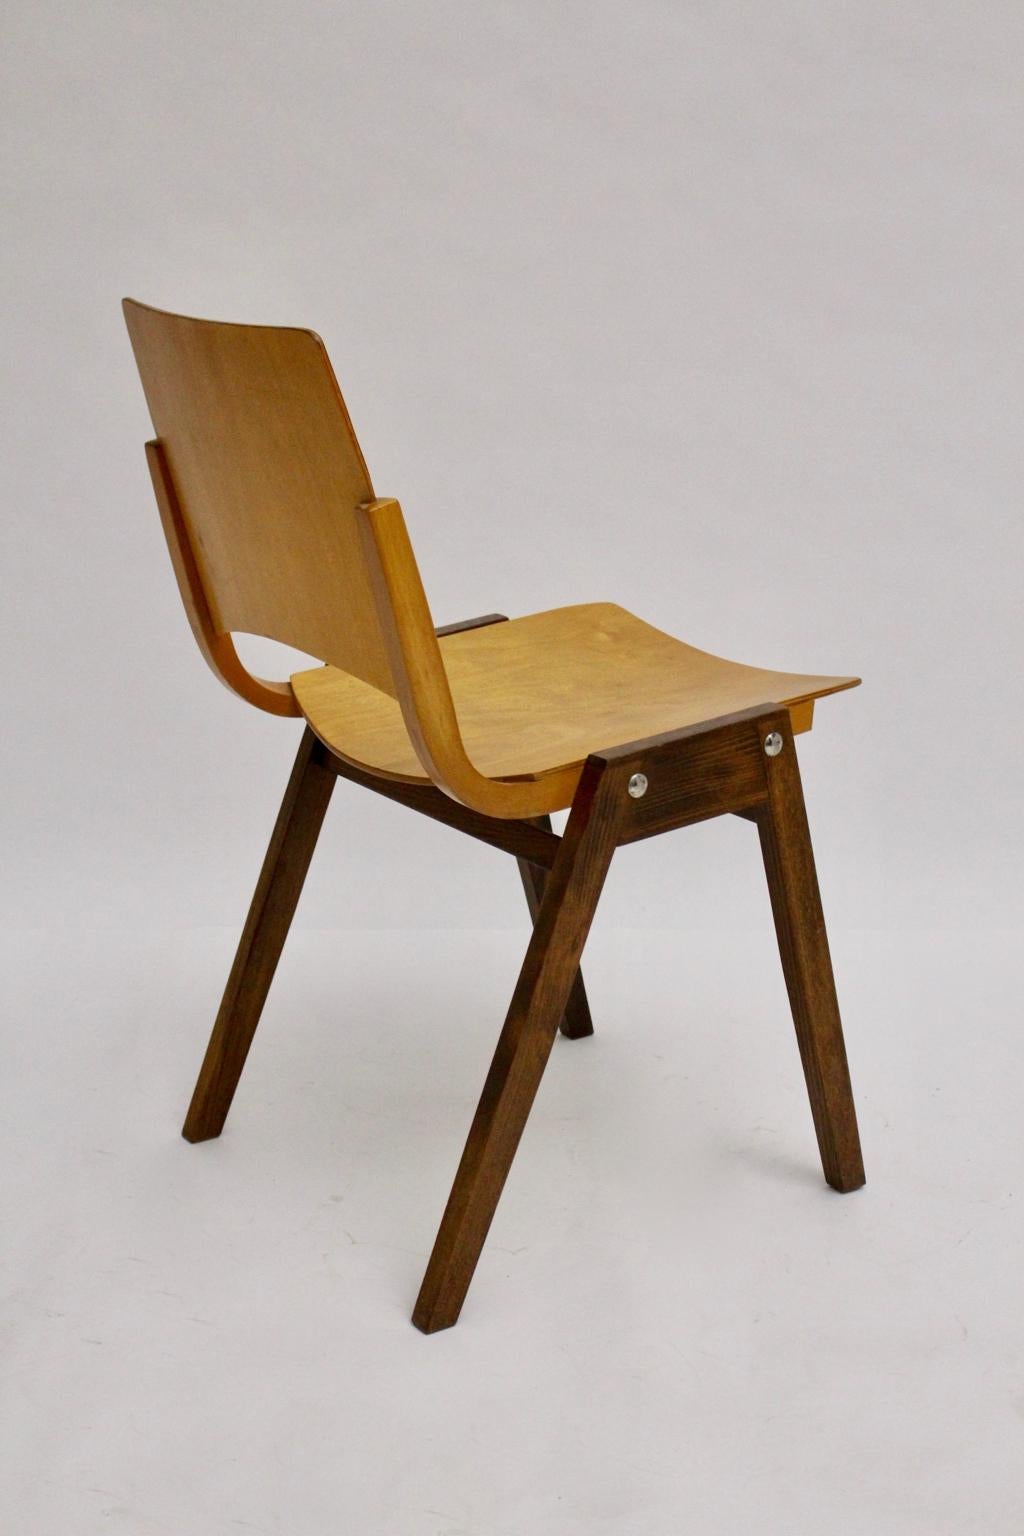 Mid-Century Modern Beech Bicolor Dining Room Chairs Roland Rainer Austria 1952 For Sale 4